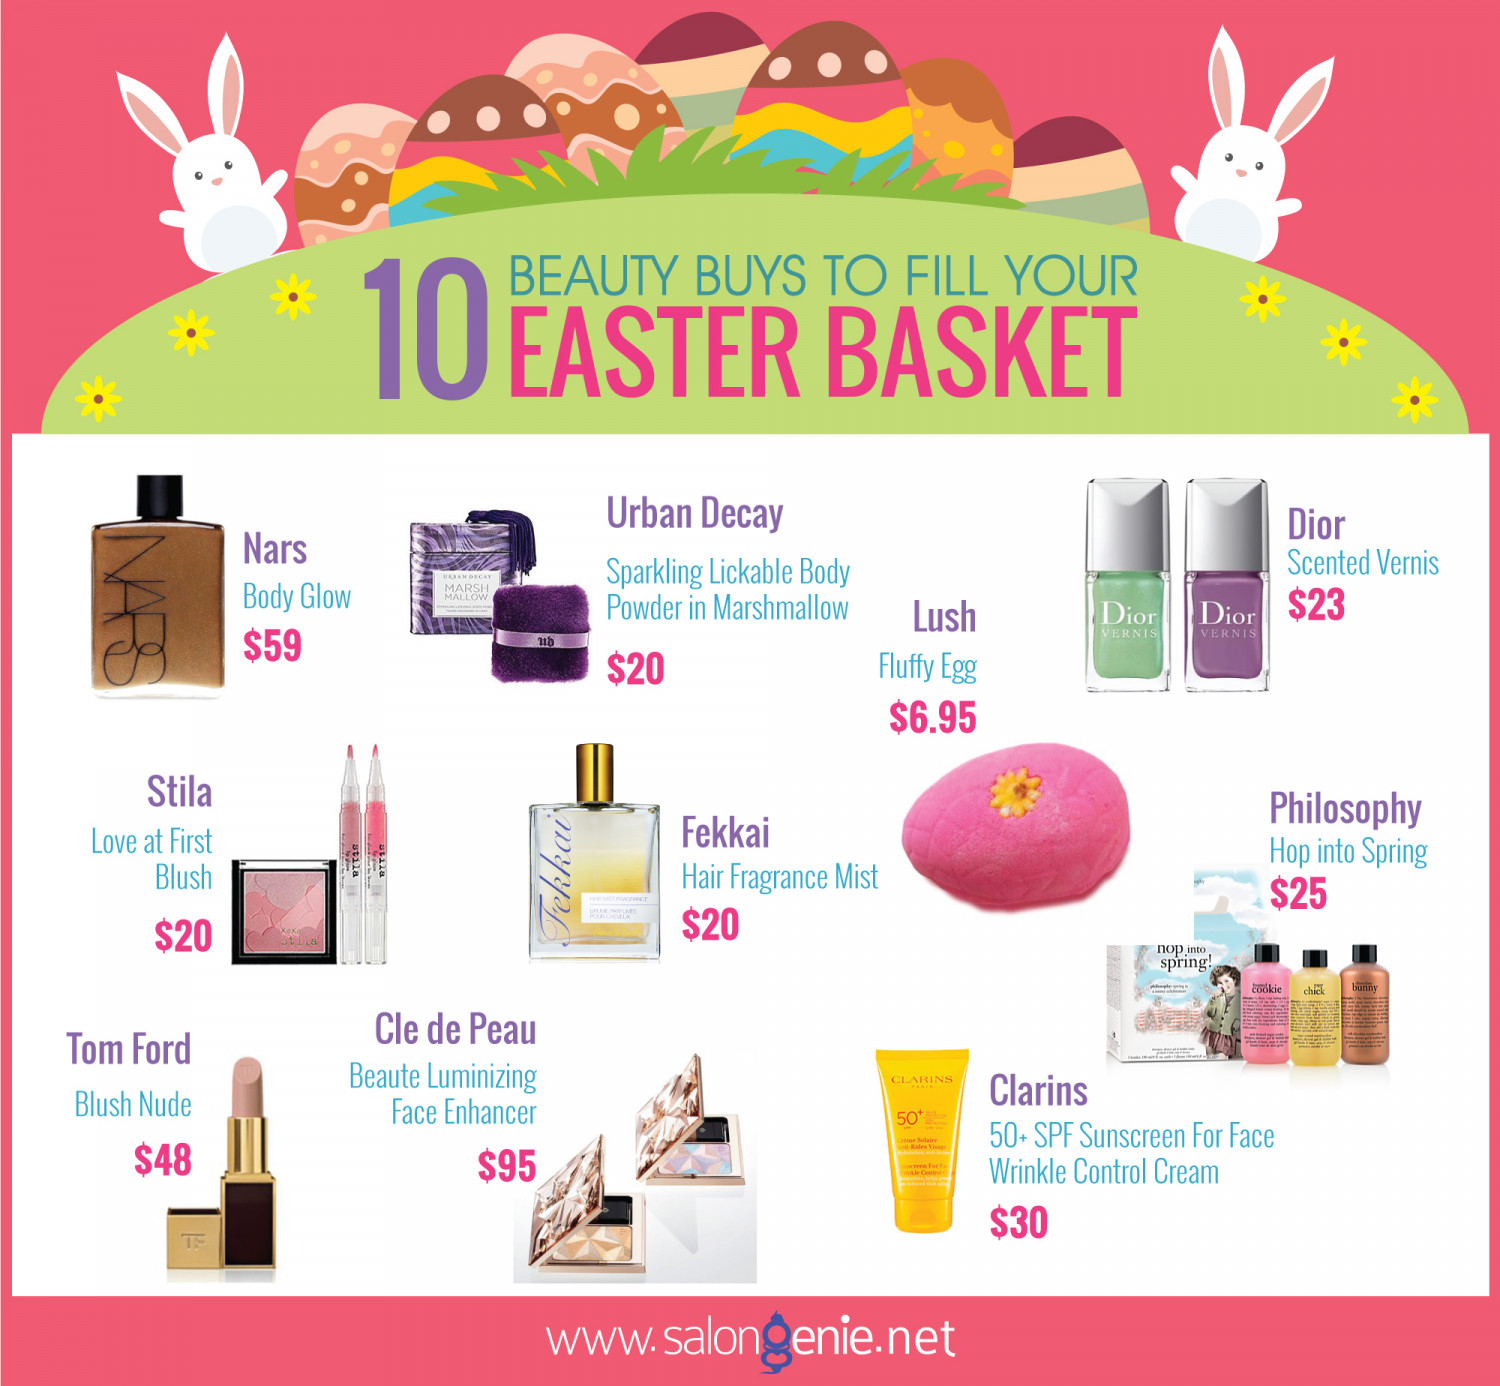 10 Beauty Buys To Fill Your Easter Basket Infographic